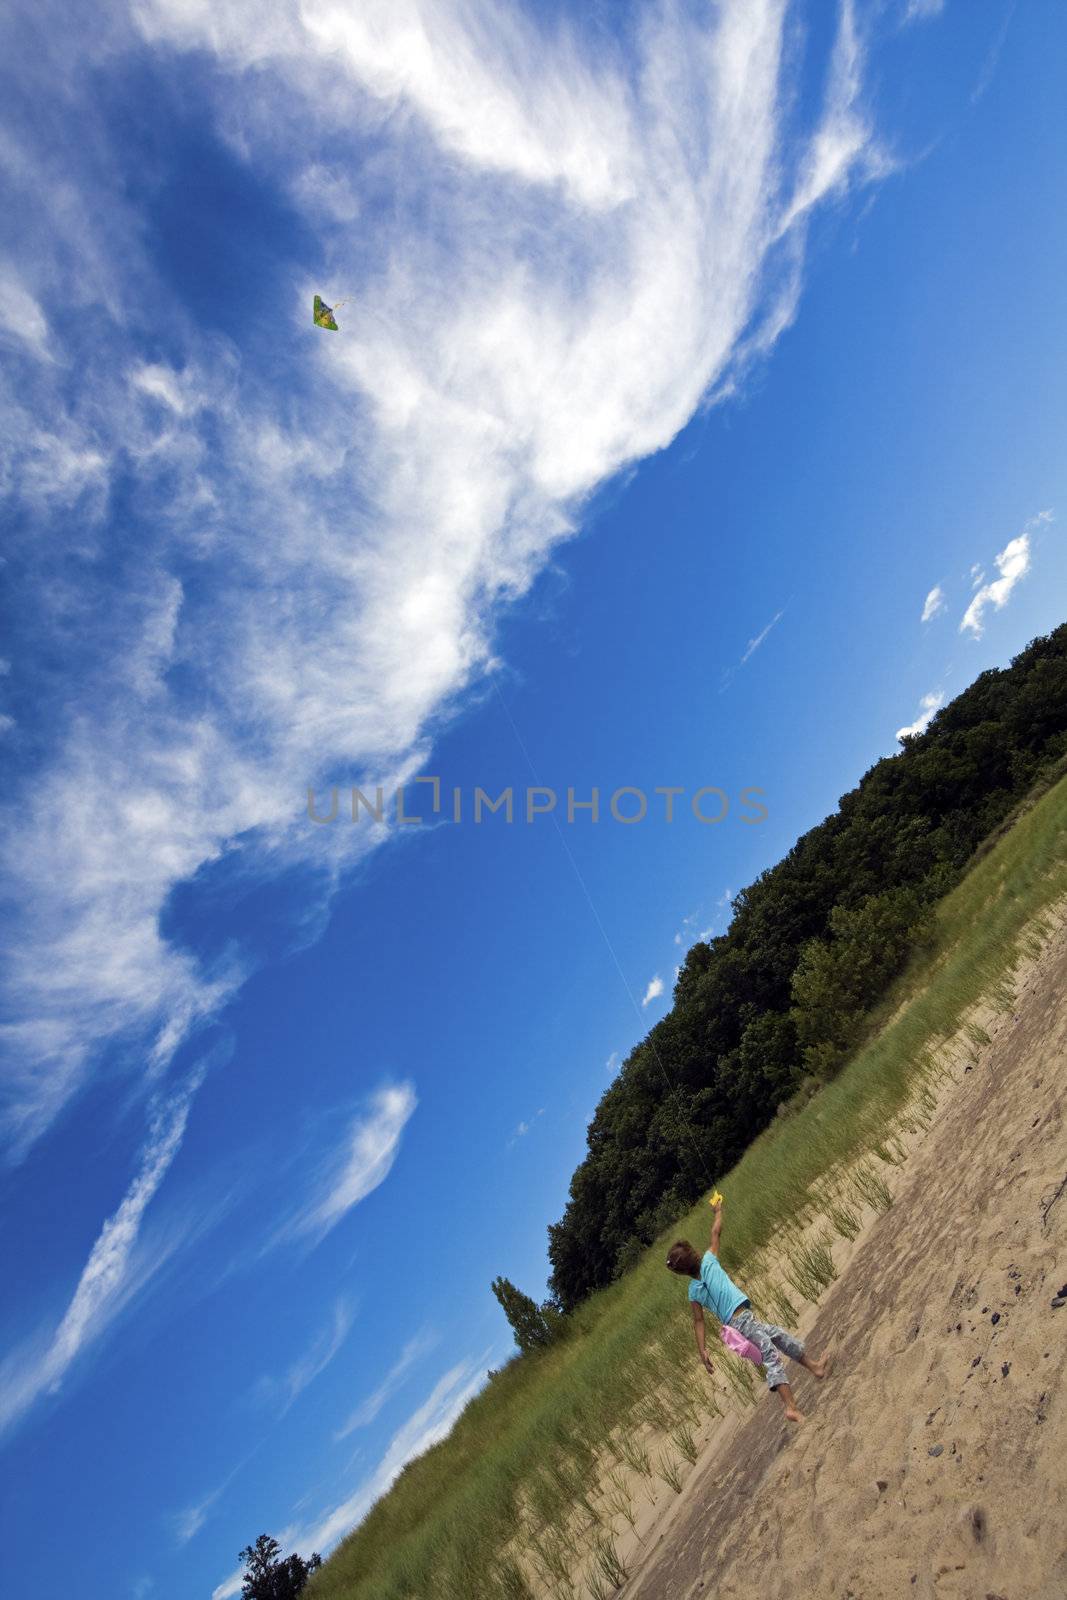 Flying Kites on the beach in Michigan by benkrut